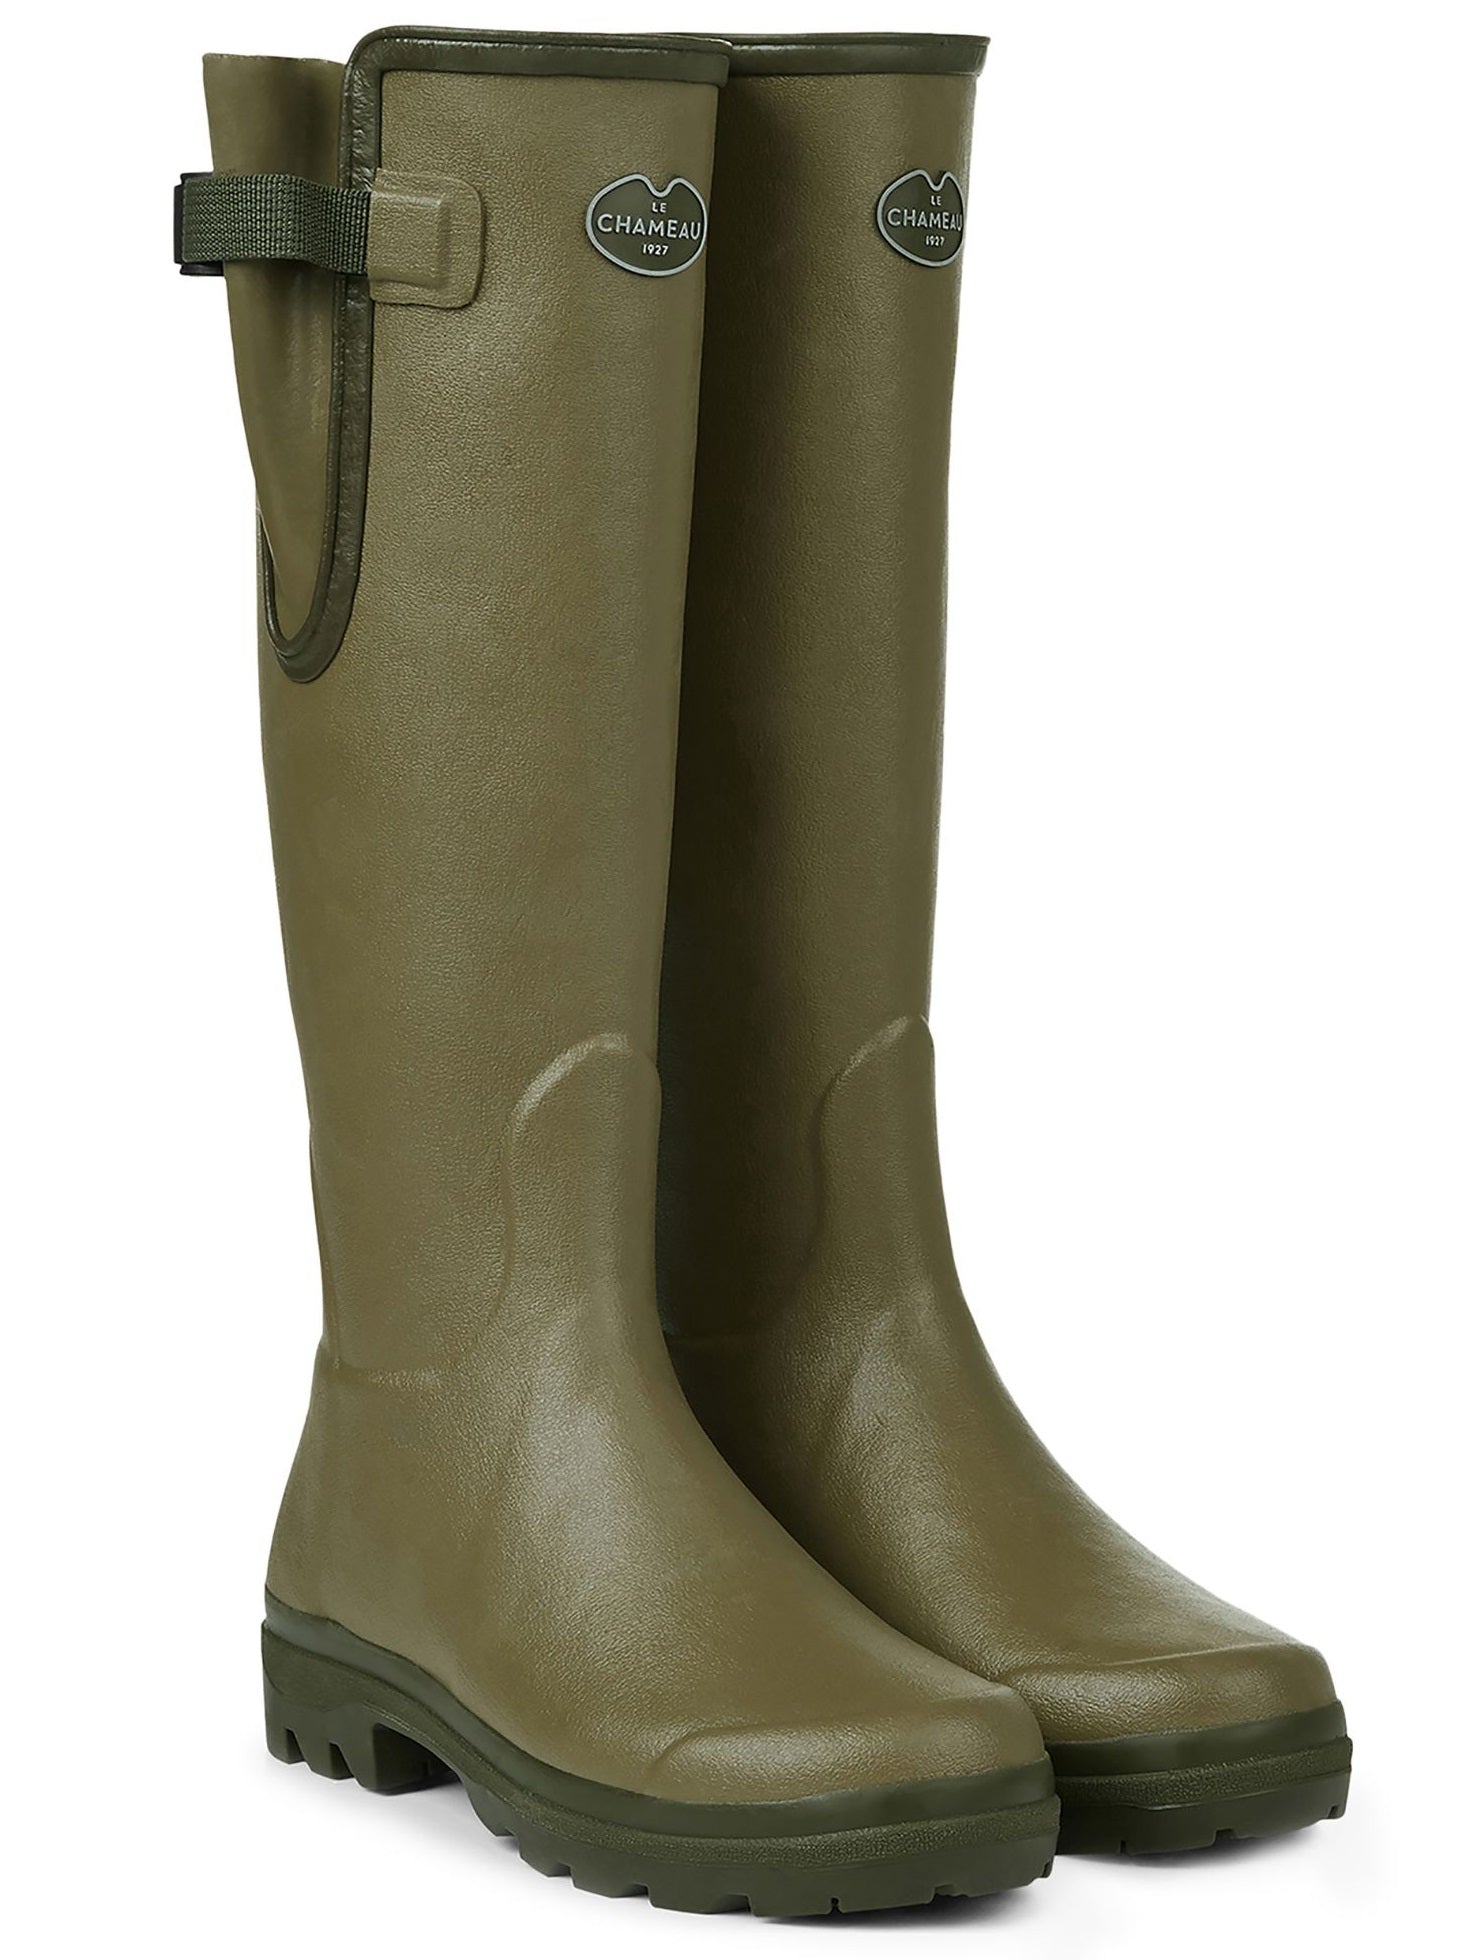 LE CHAMEAU Vierzon Boots - Ladies Jersey Lined - Iconic Green